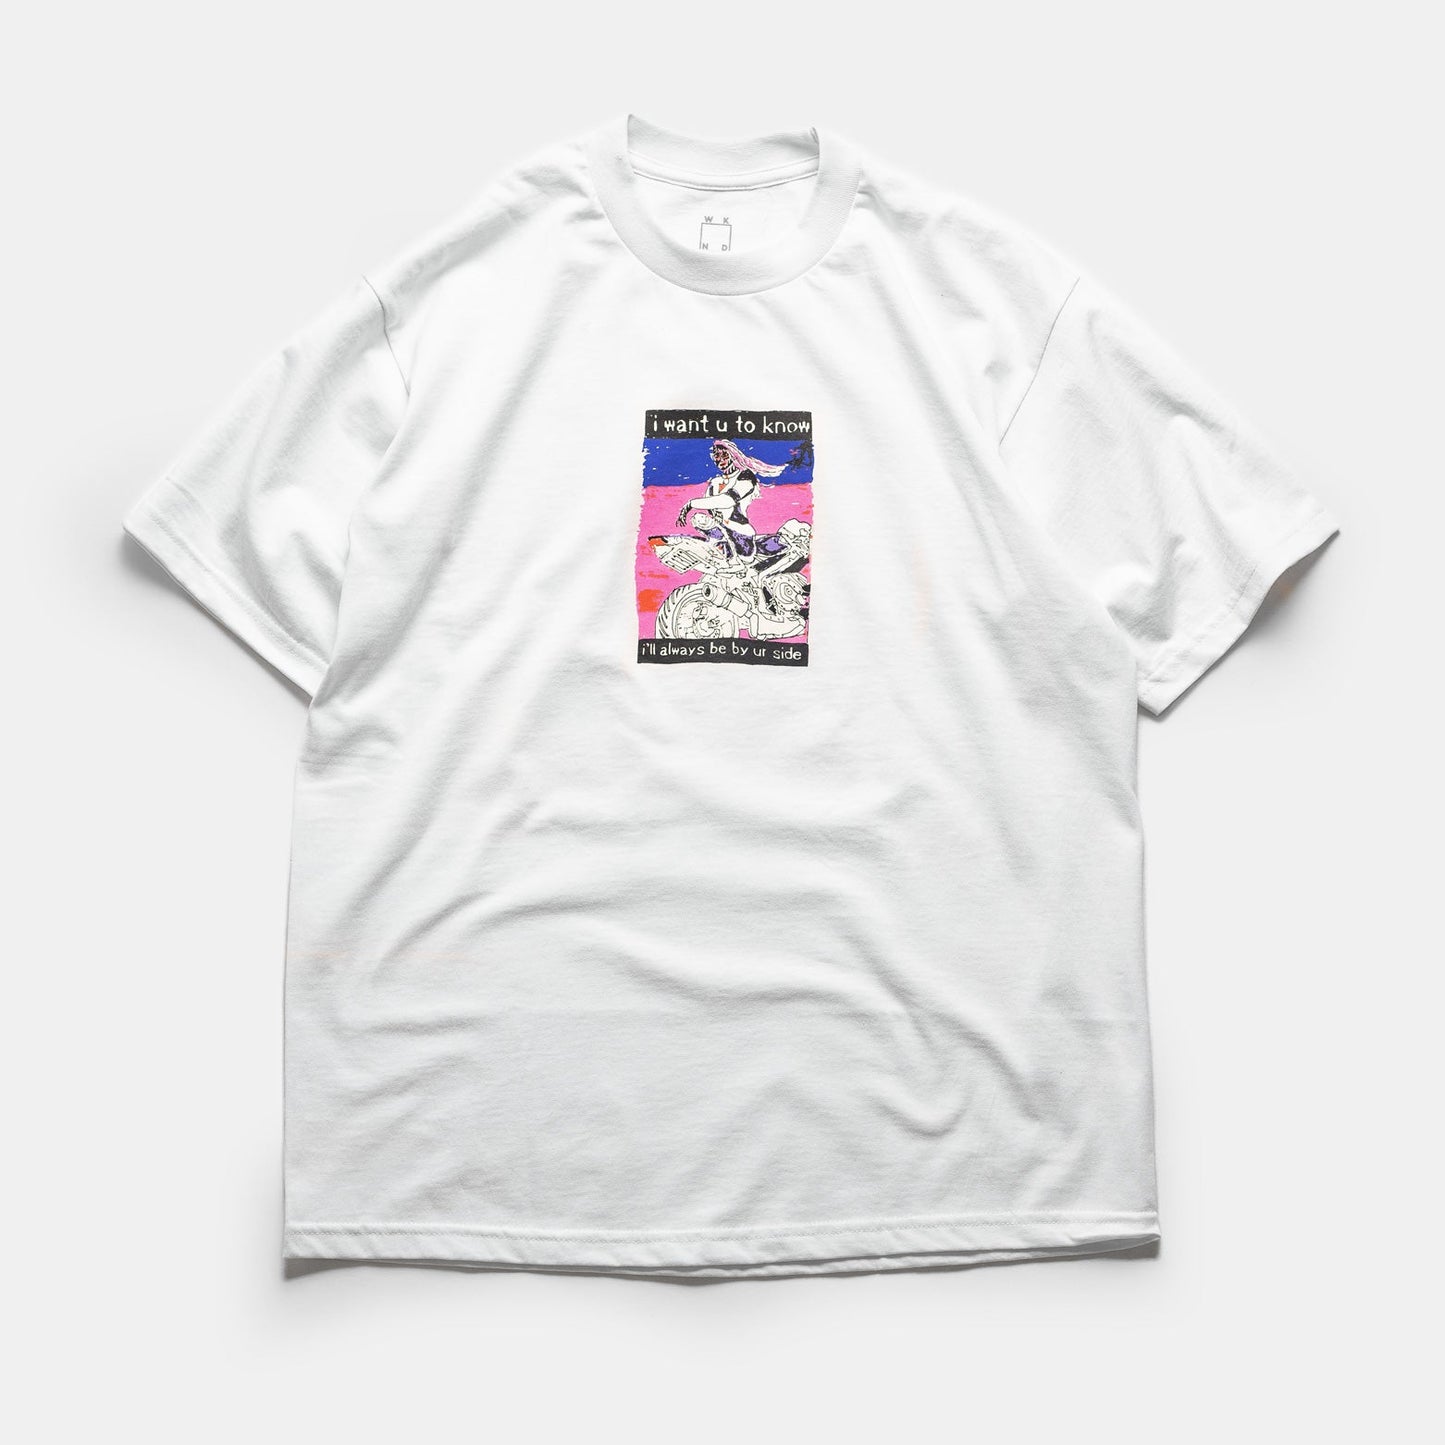 WKND - By your side Tee - White - Parliamentskateshop